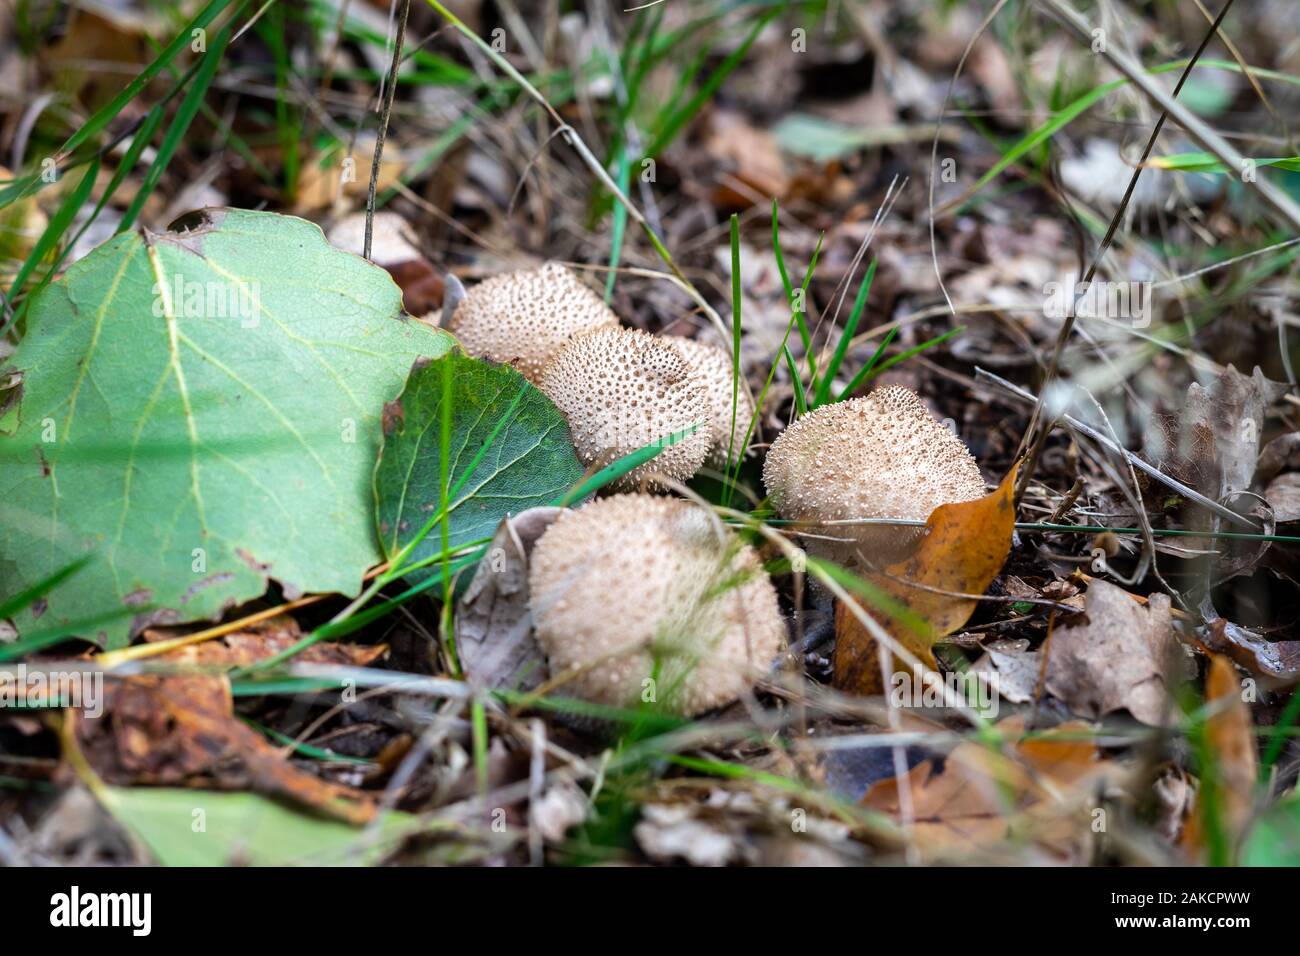 A group of young mushrooms of the genus Lycoperdon. Stock Photo